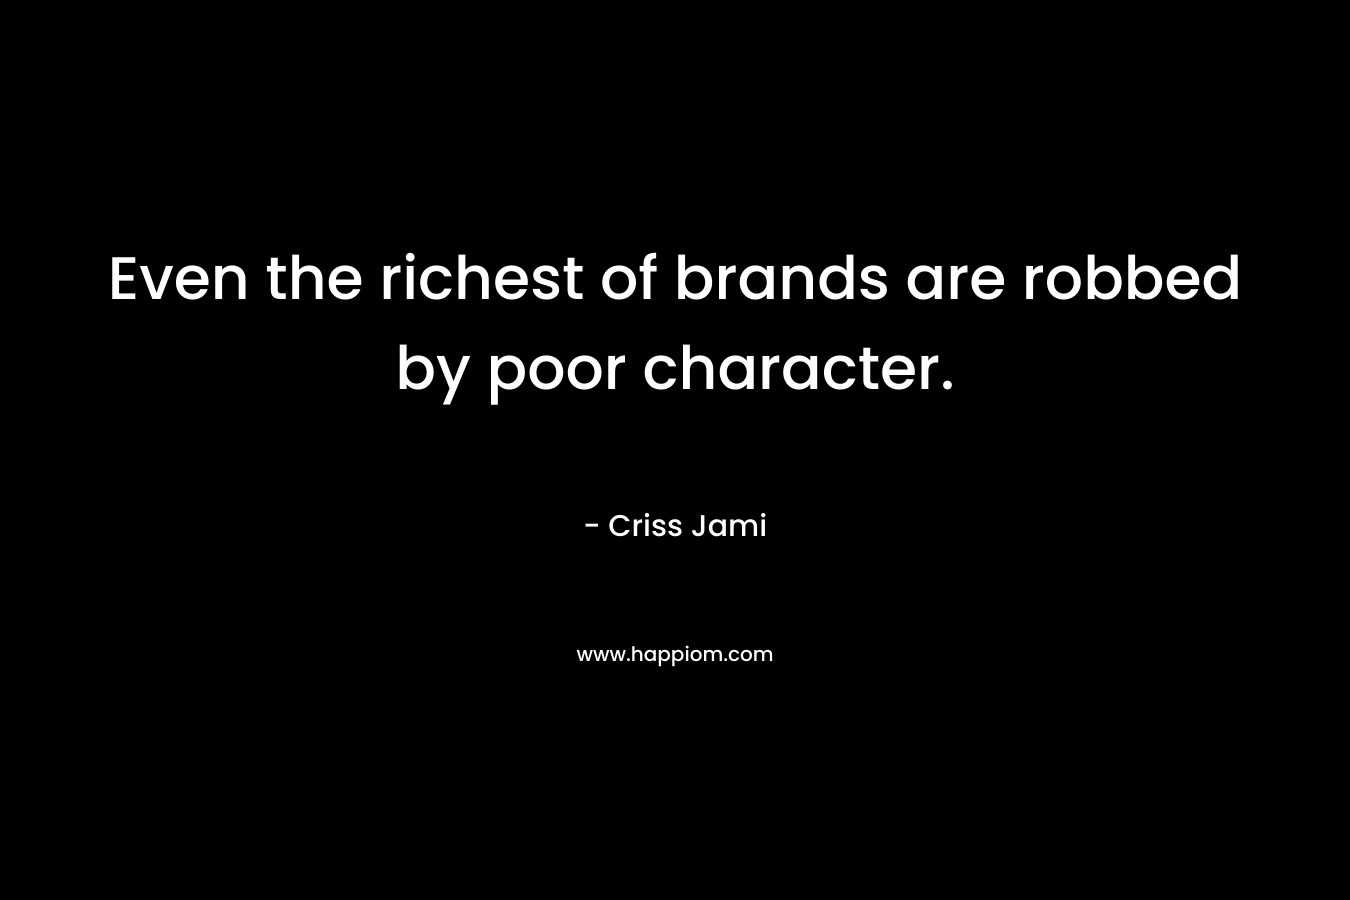 Even the richest of brands are robbed by poor character. – Criss Jami